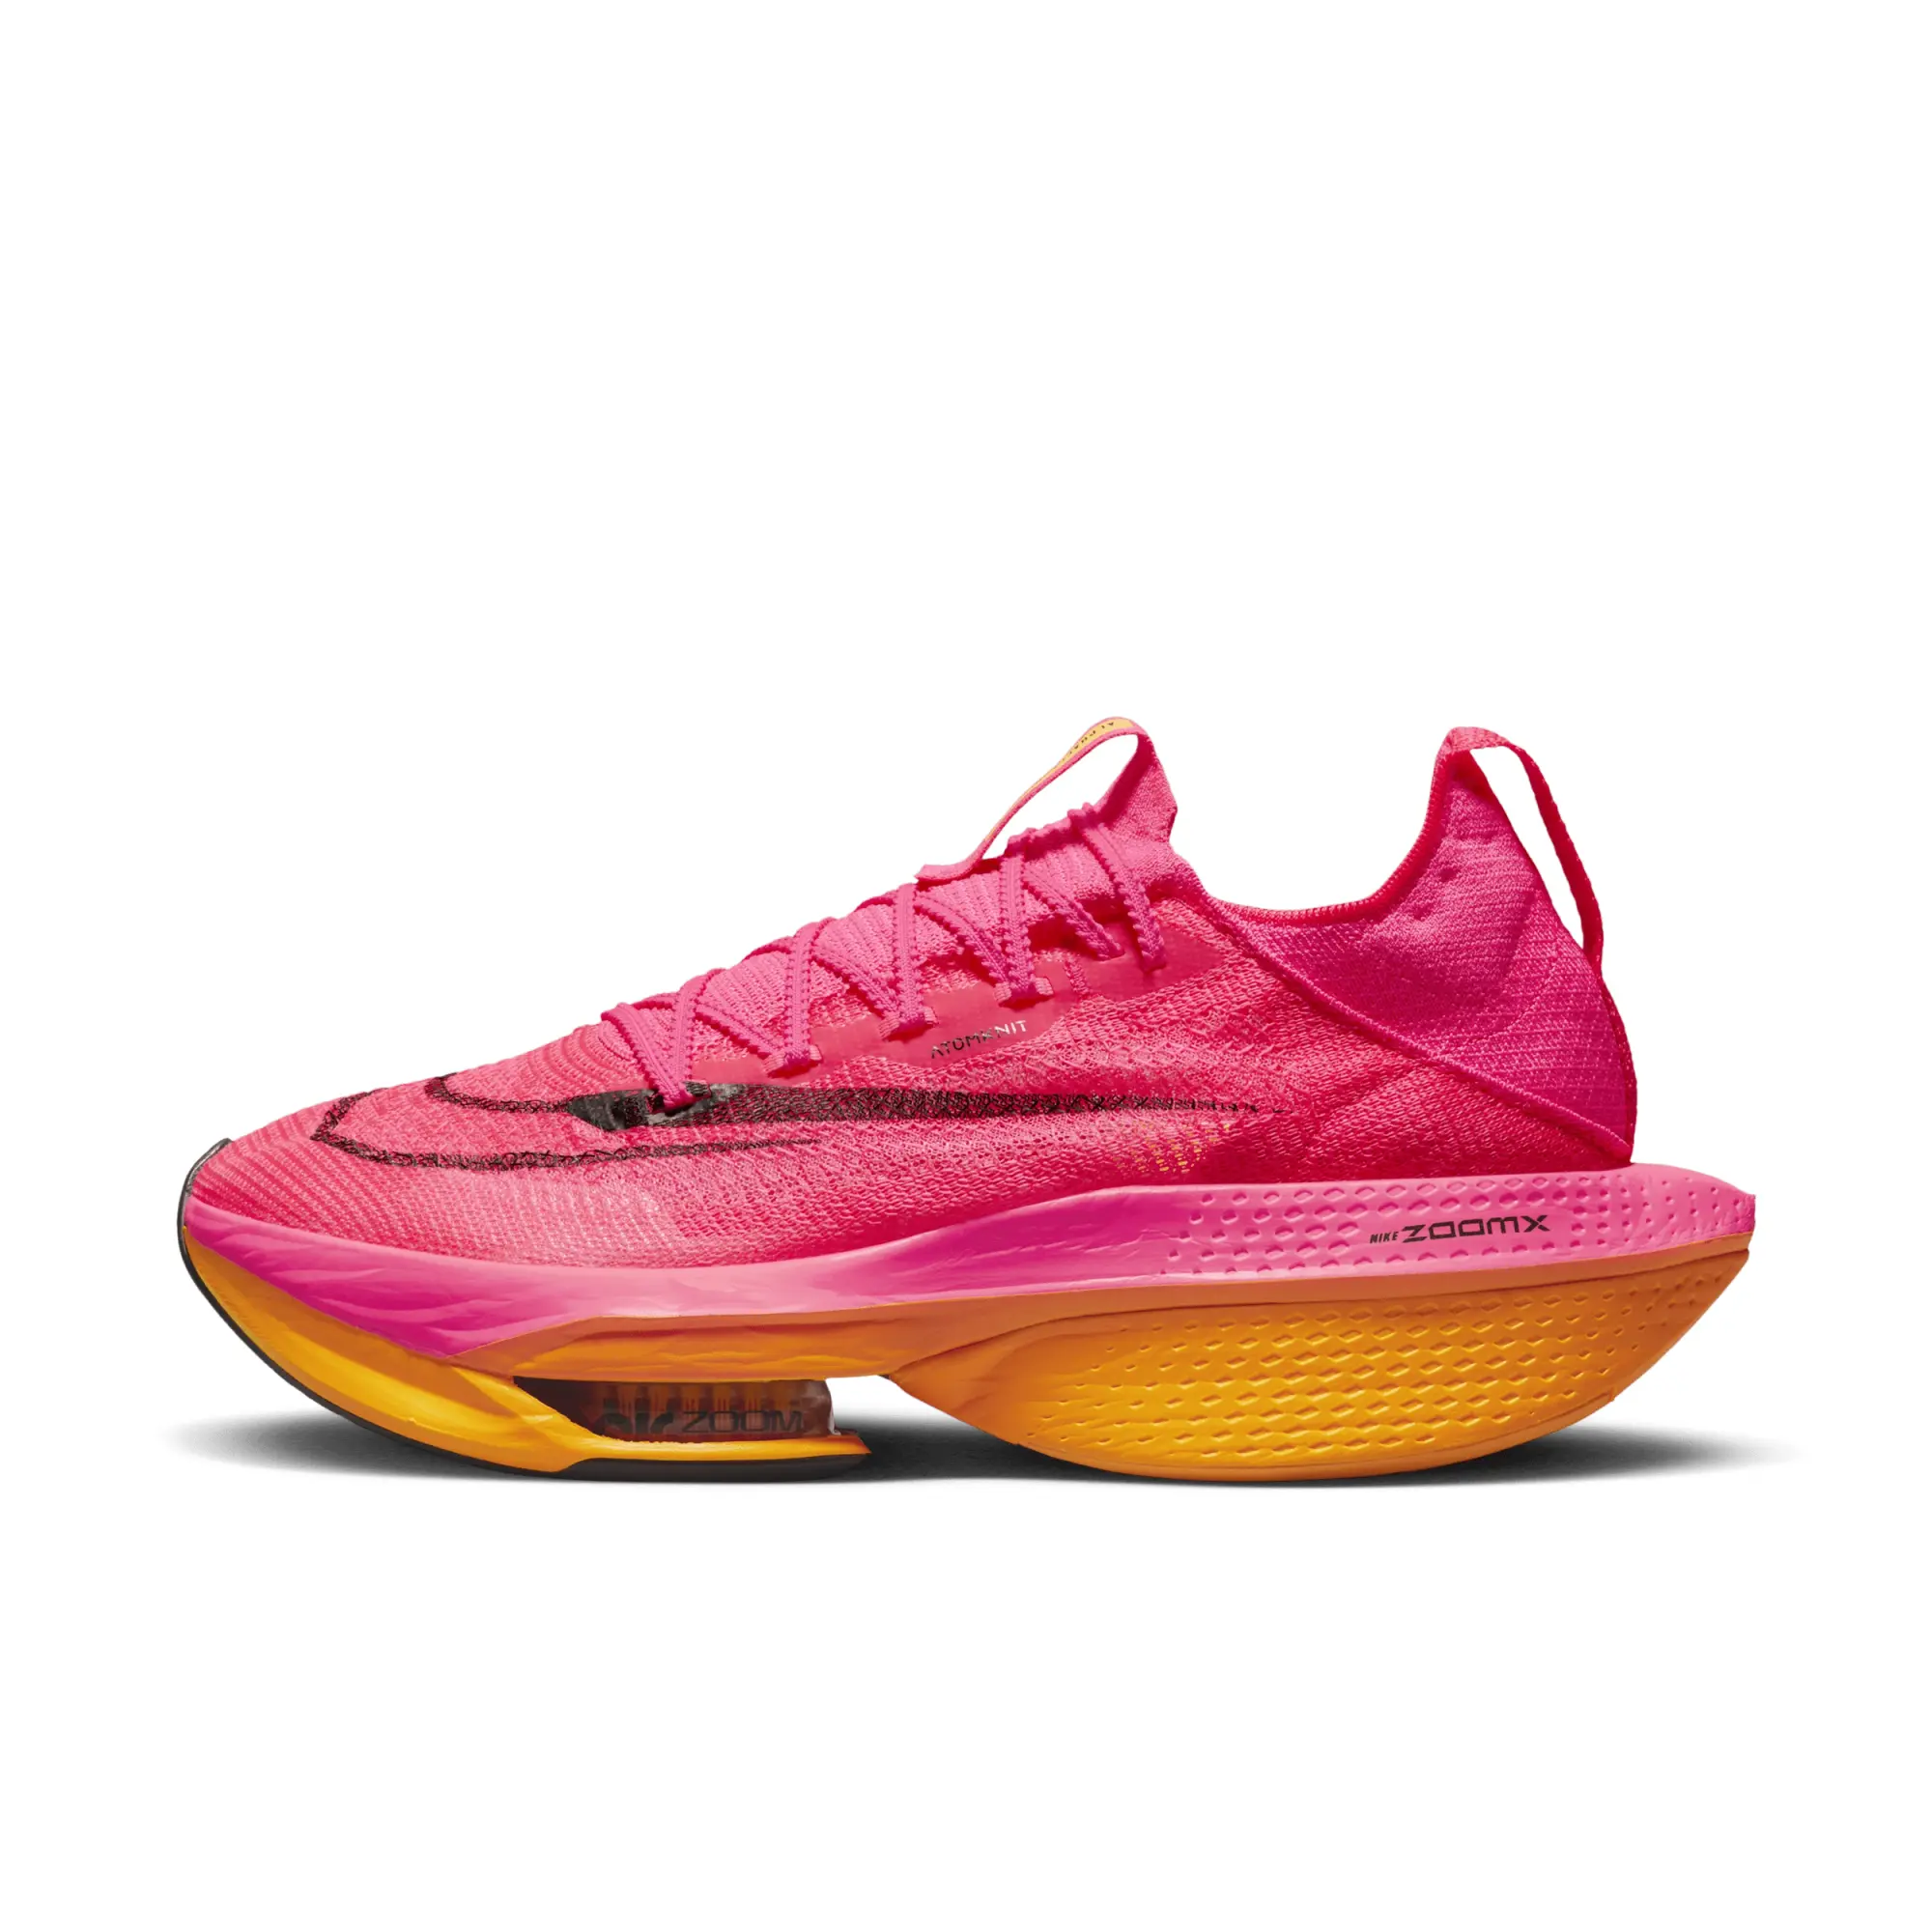 Nike Zoom Alphafly NEXT% 2 - Pink, Pink